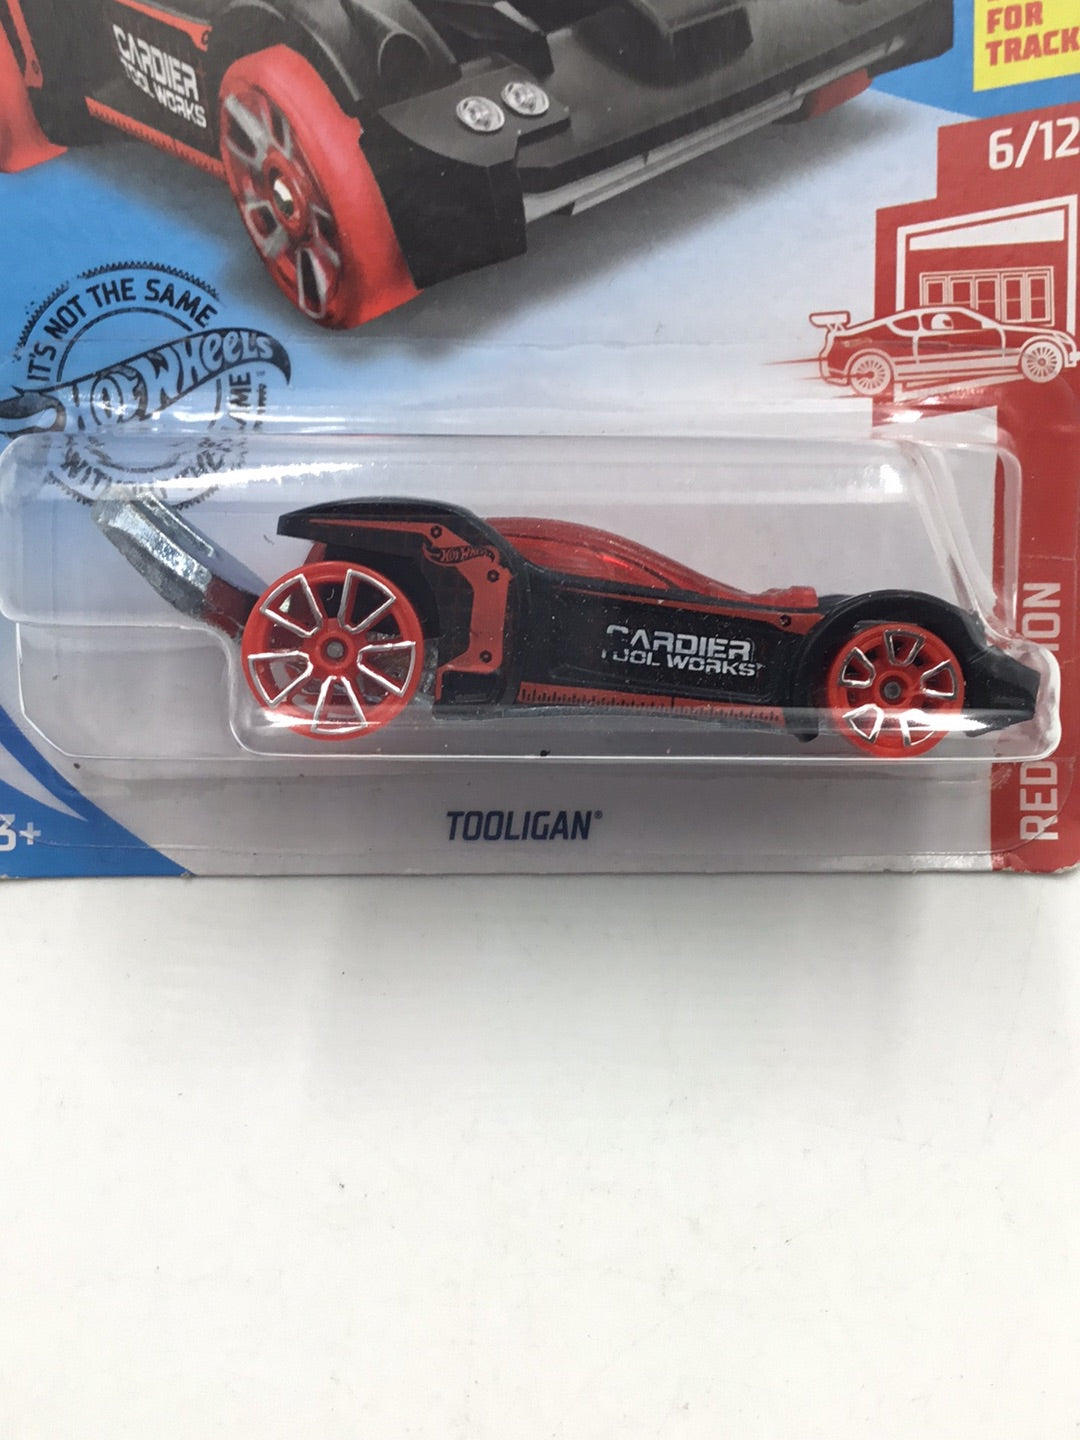 2020 hot wheels #4 red edition Tooligan target red #6 AA2